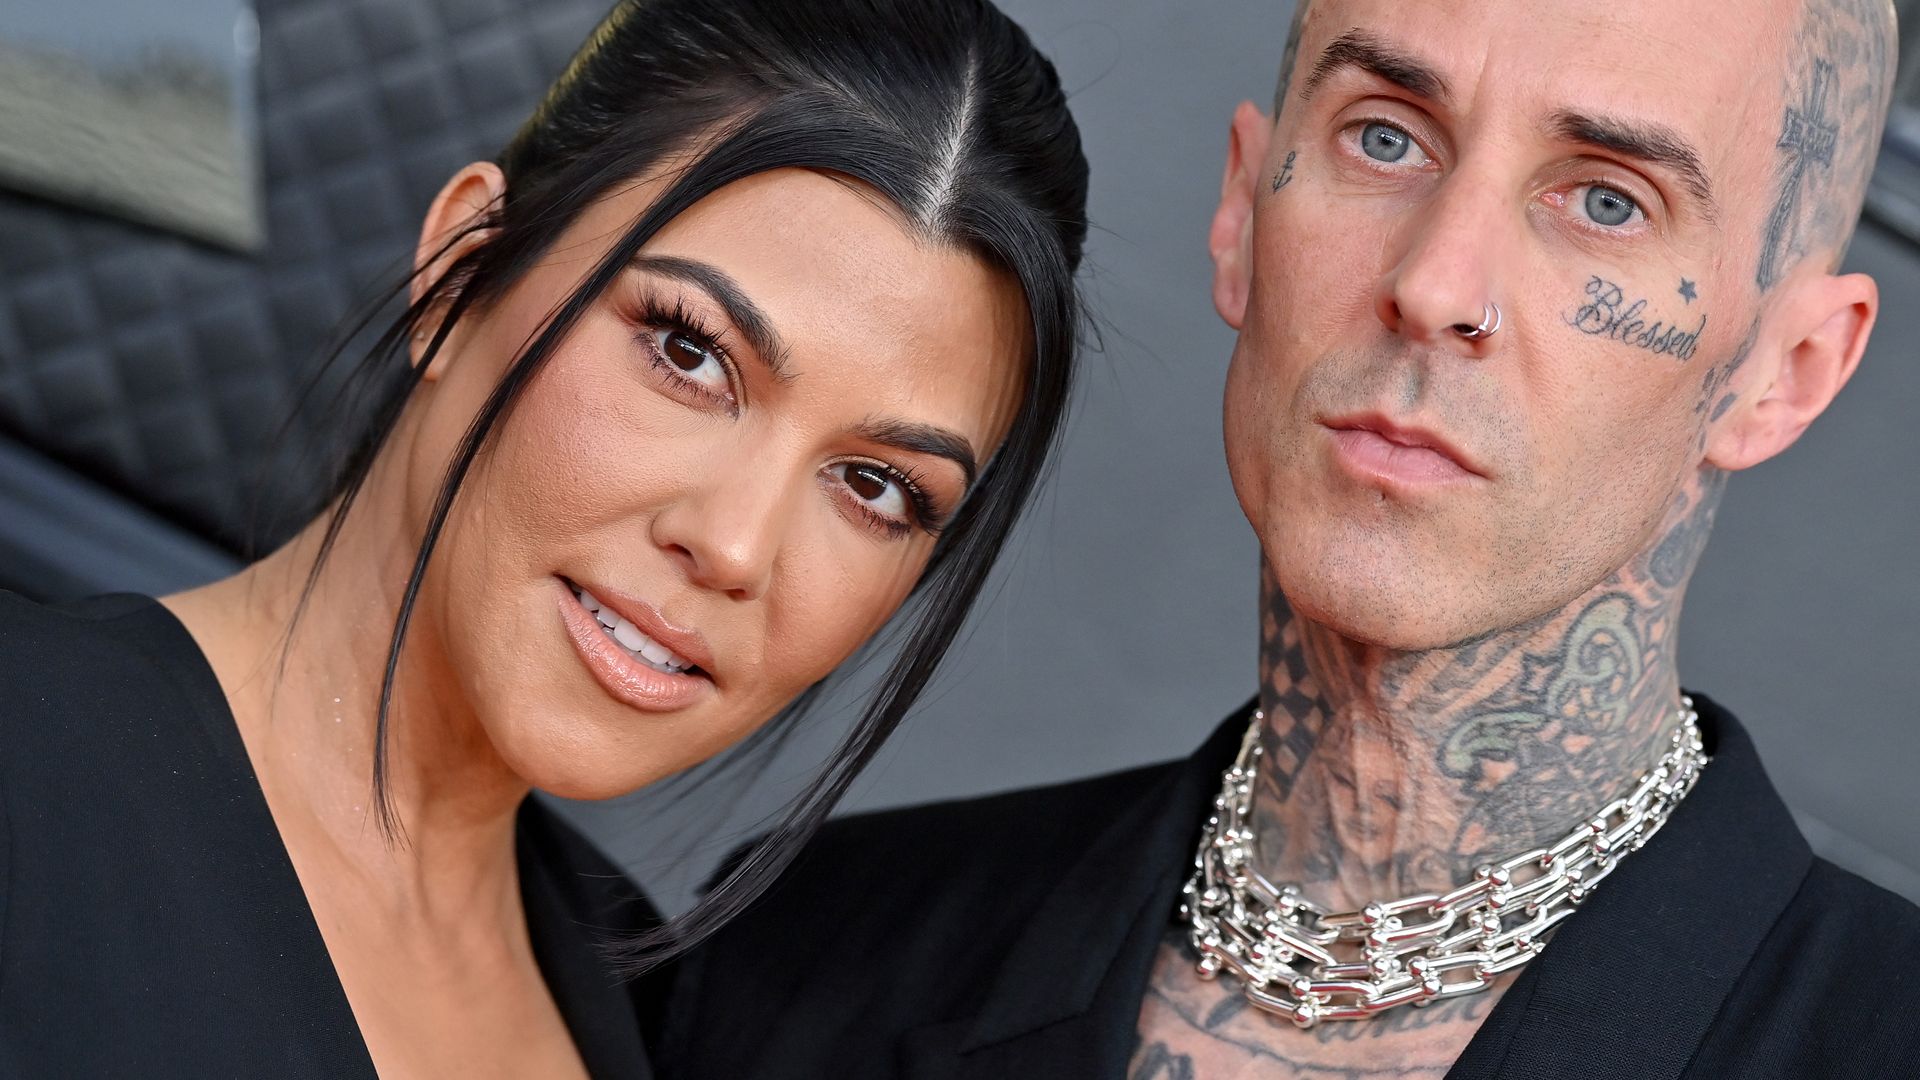 Kourtney Kardashian and Travis Barker's scary artwork means it's always Halloween at their home